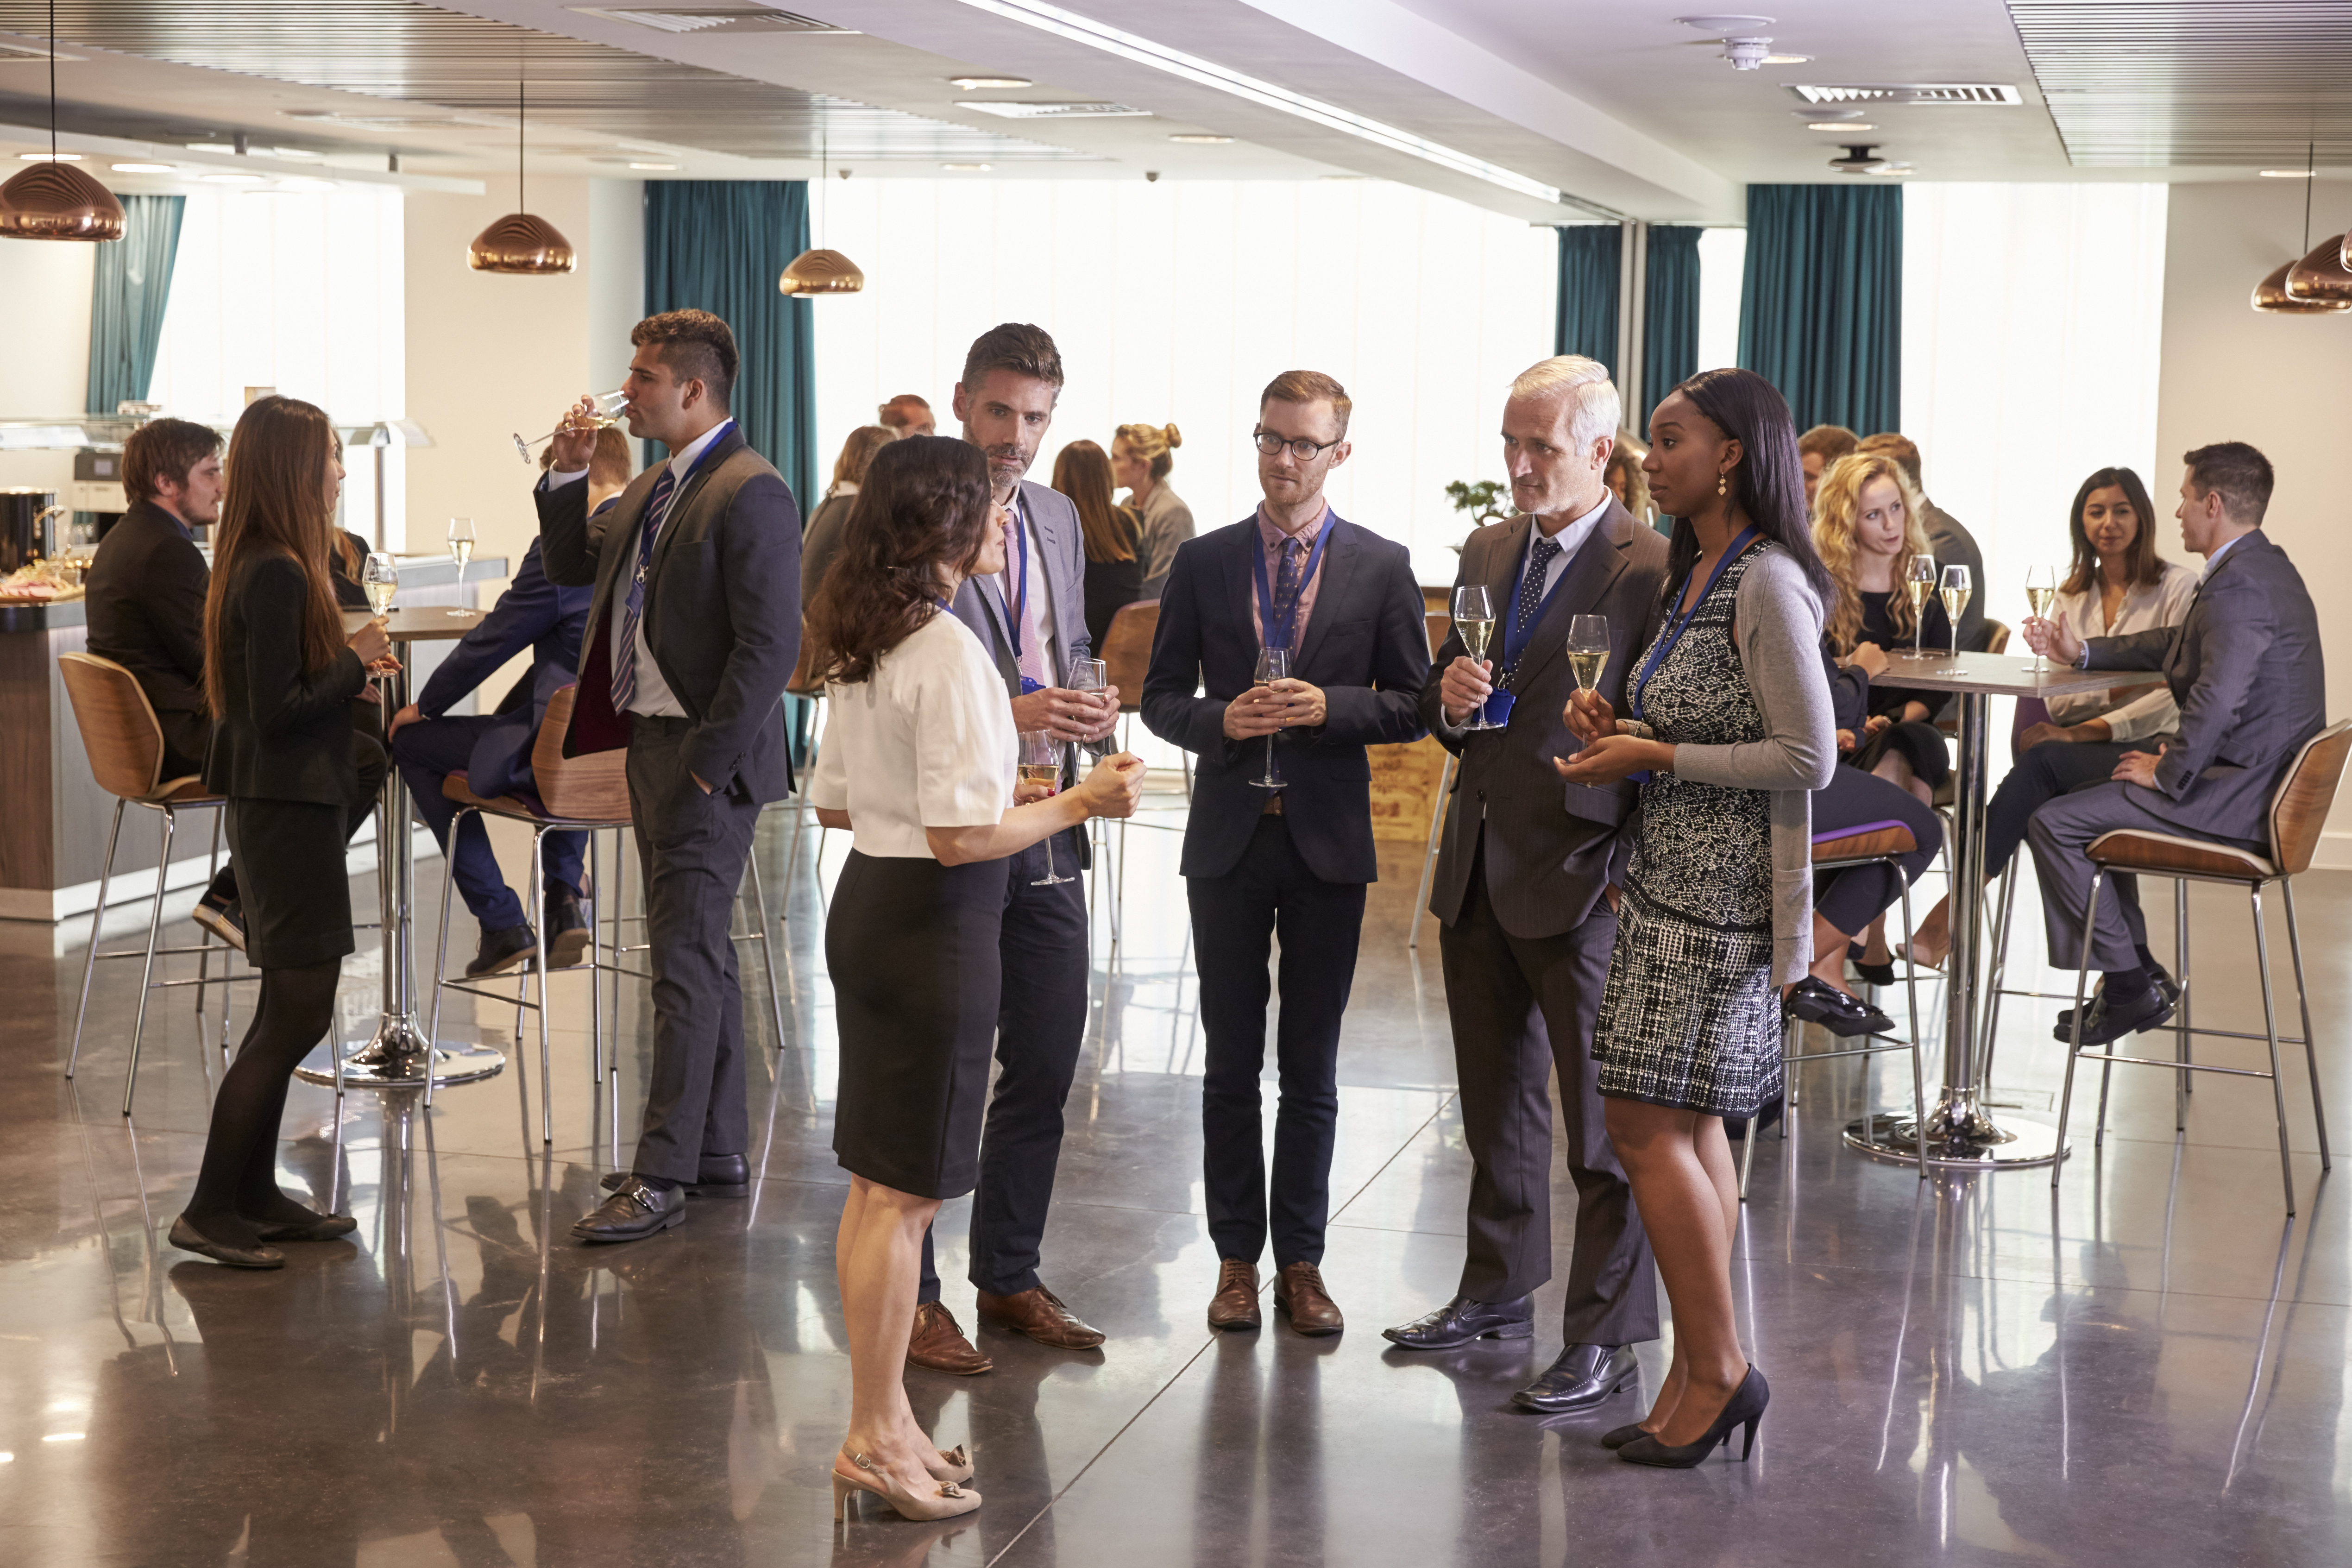 Approaching Networking More Effectively: The Value in Weak Ties and Ideabanks